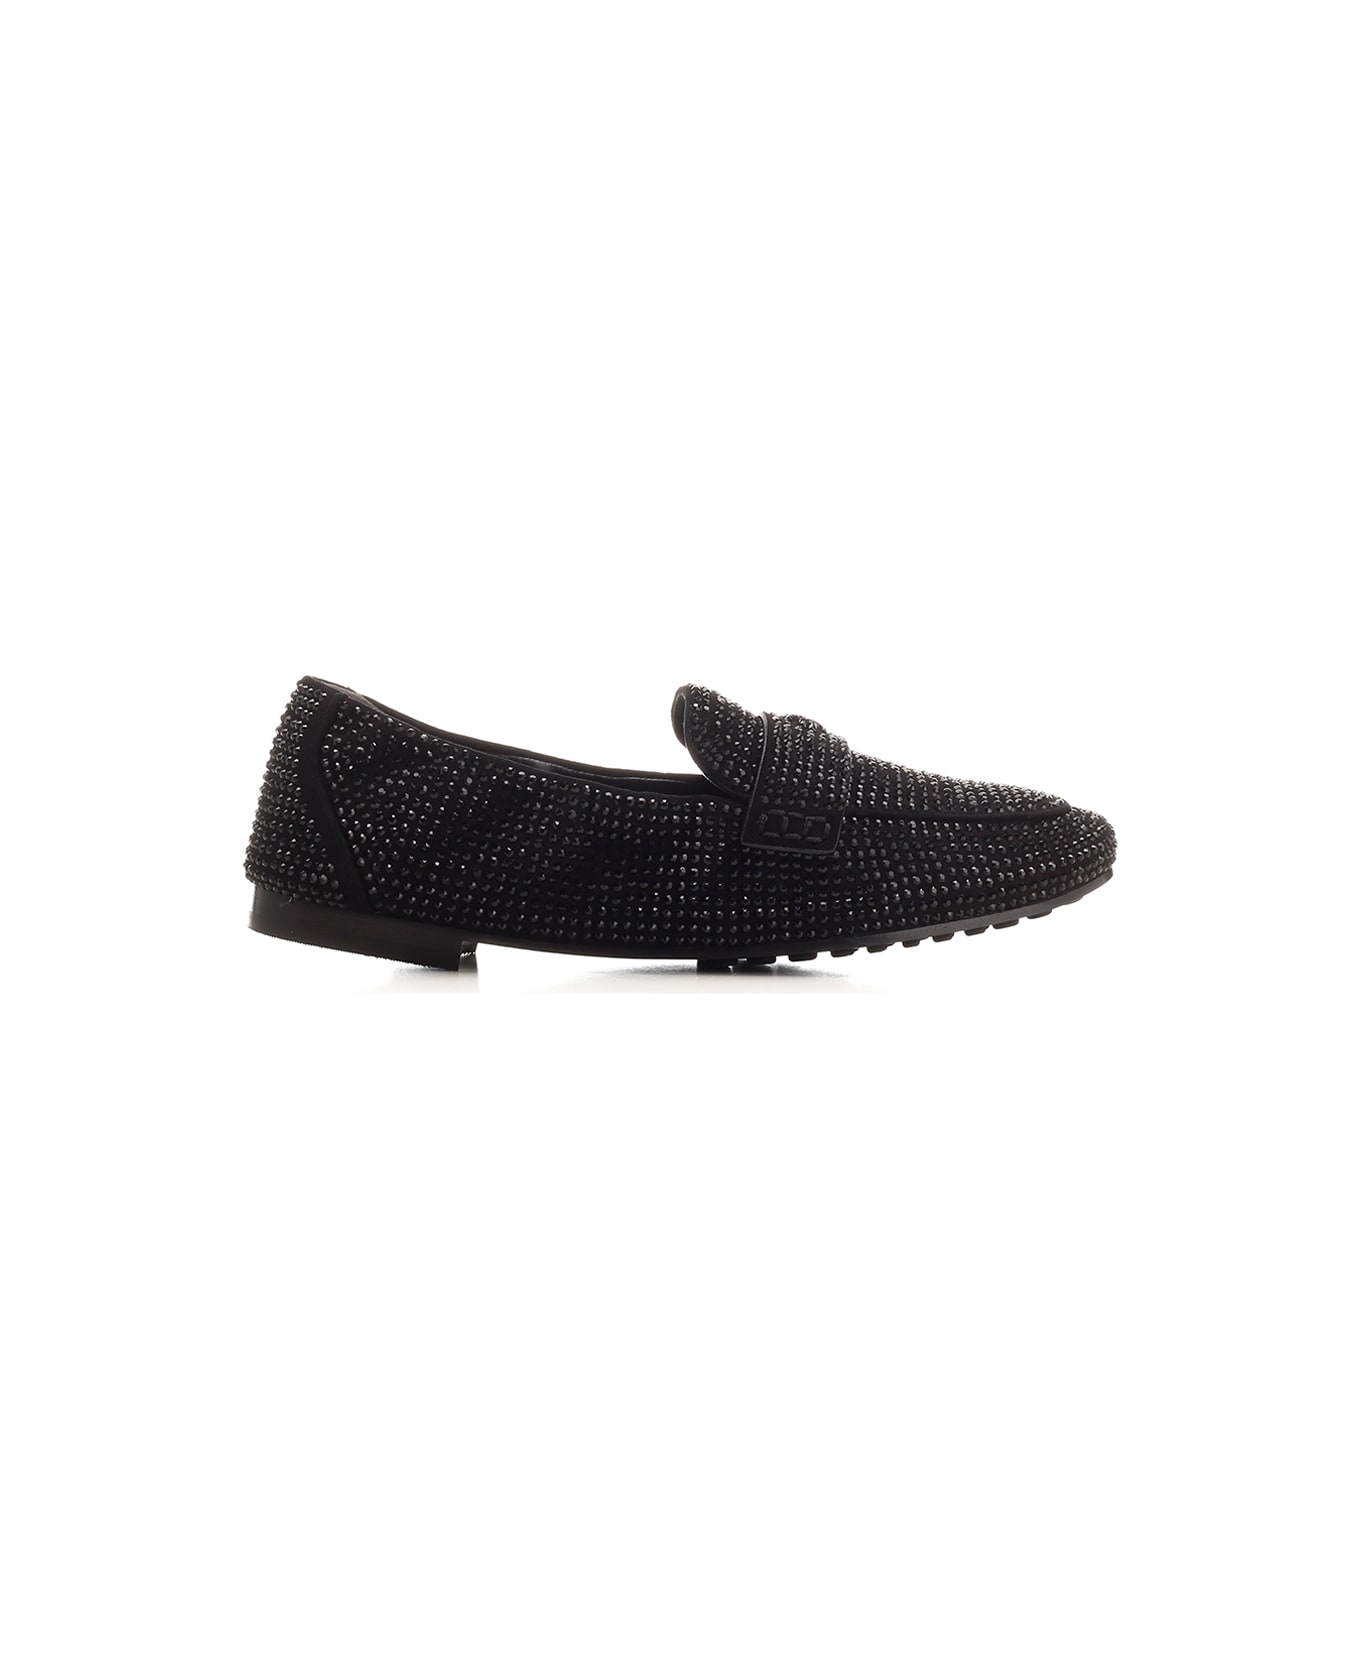 Tory Burch Leather Ballet Loafers - Perfect Black Jet